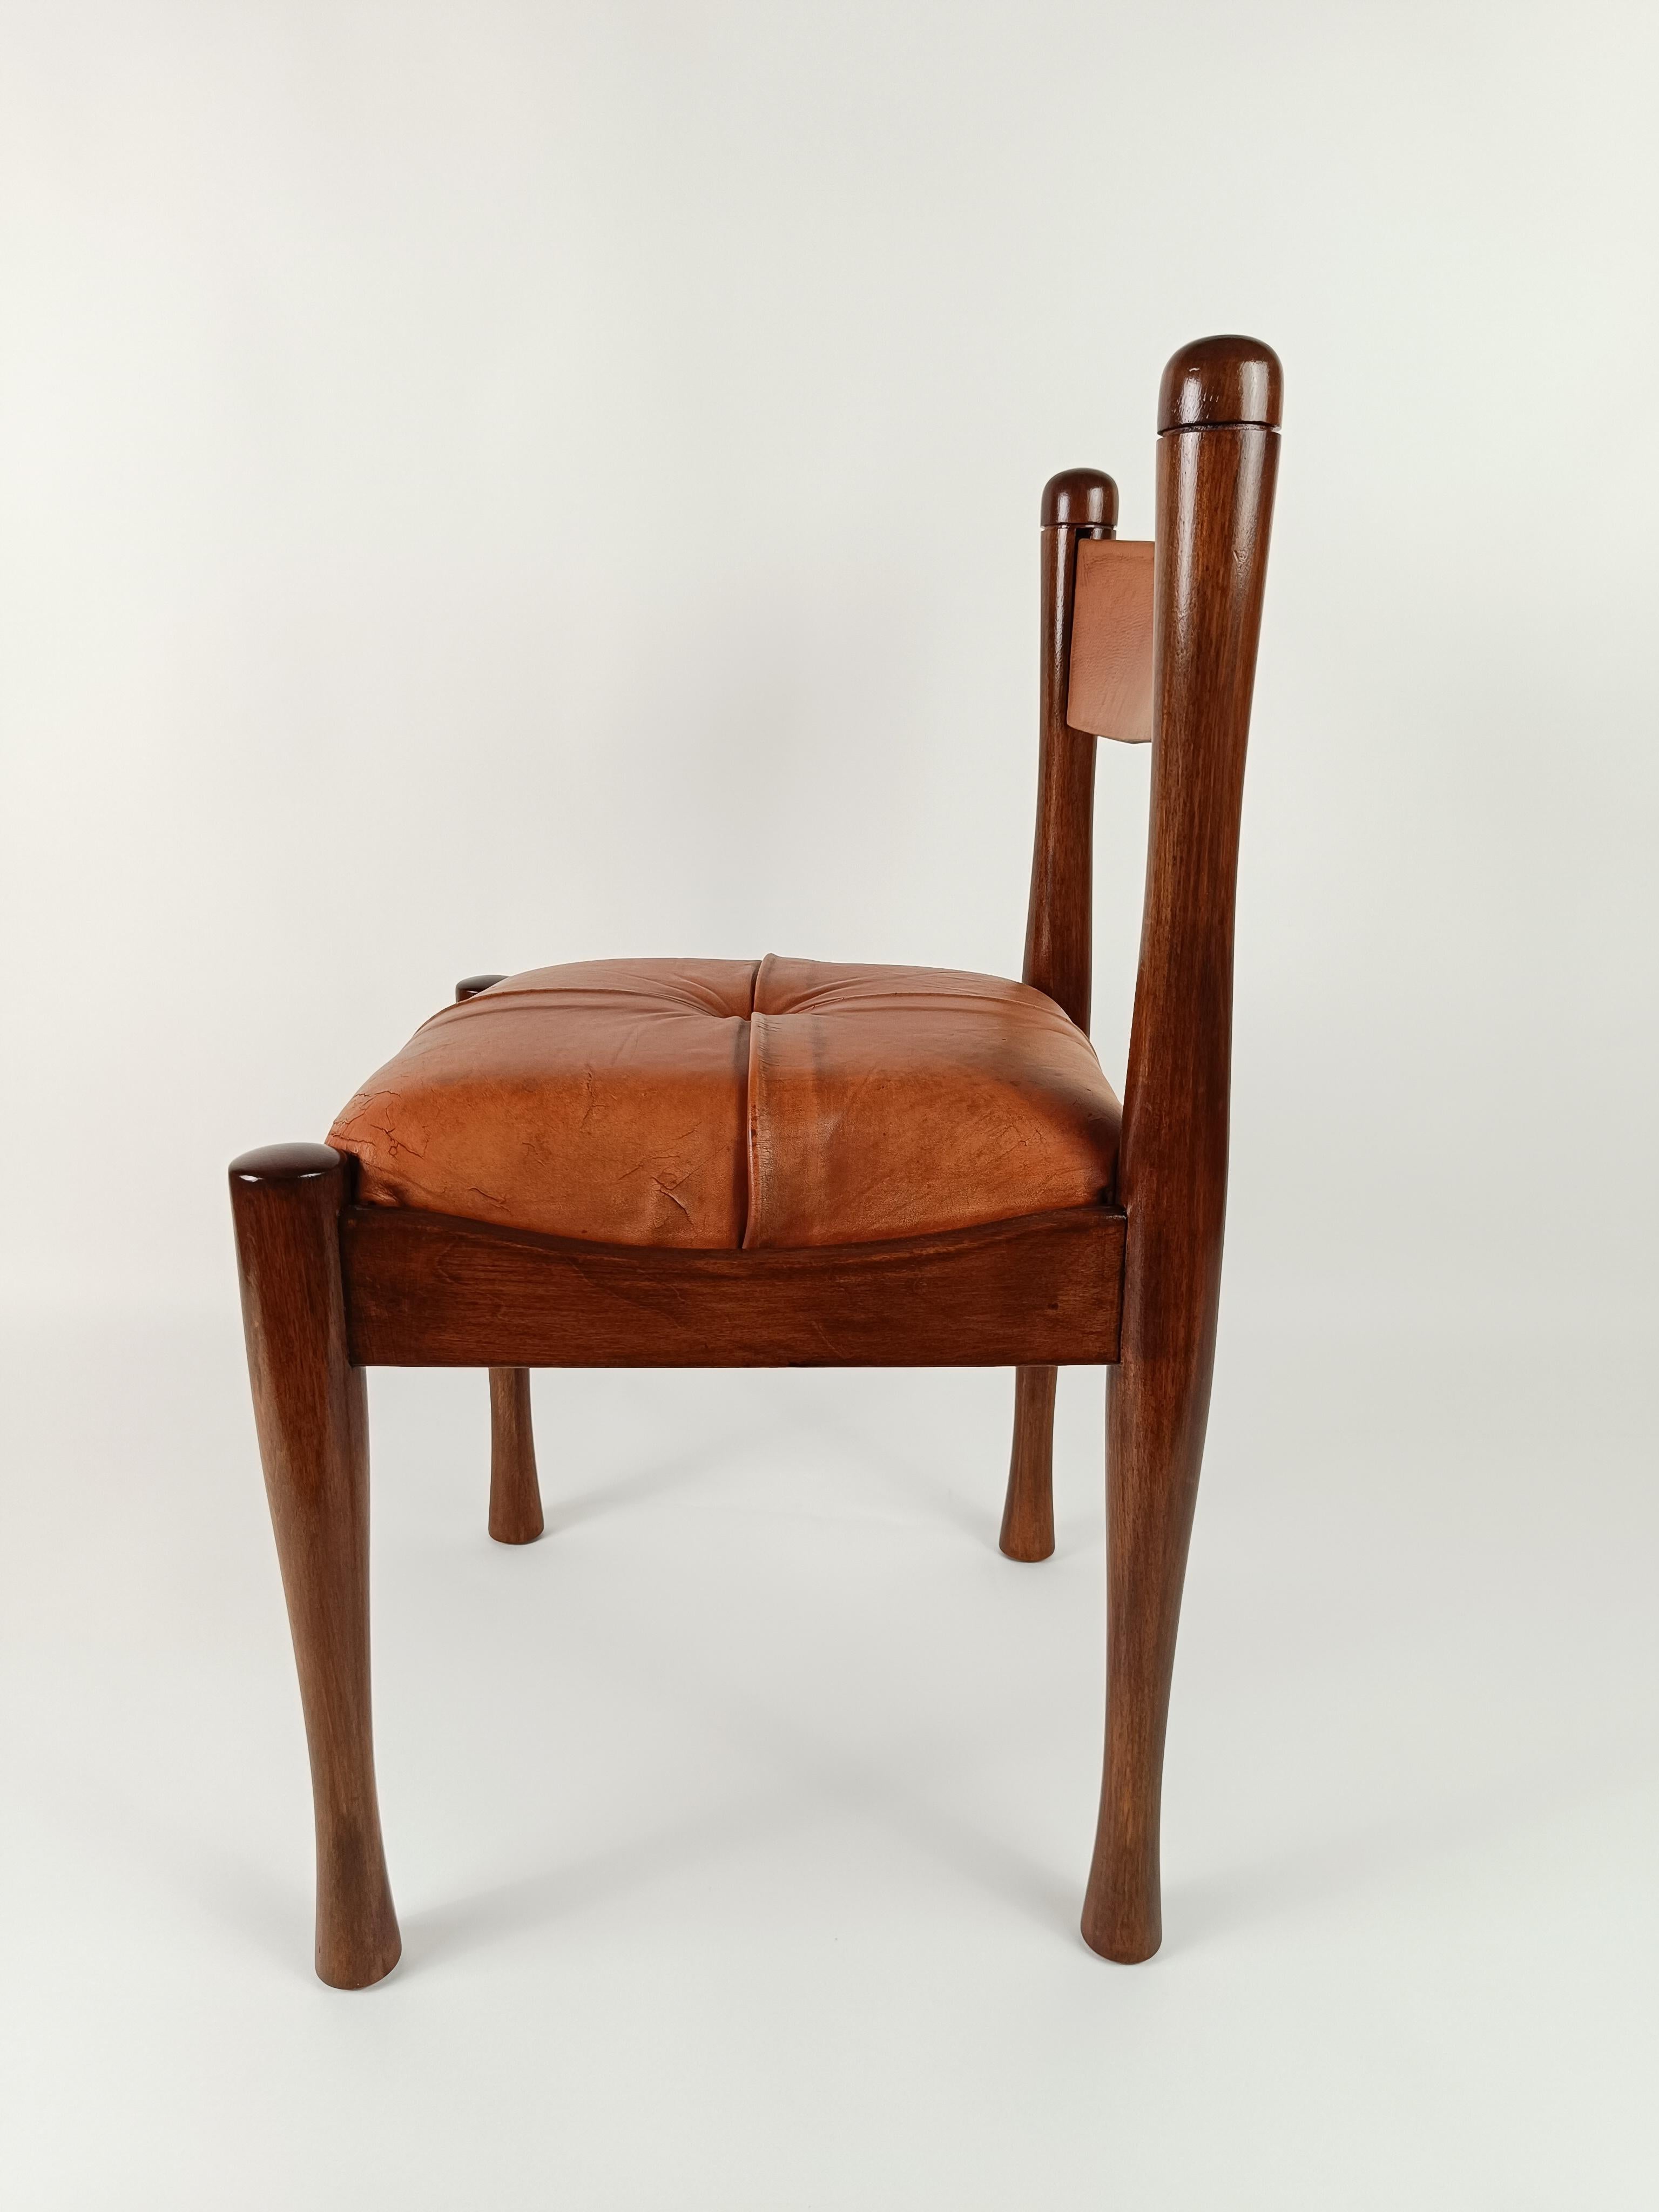 A set of 4 Italian Chairs in Wood and Cognac Leather by S. Coppola for Bernini  For Sale 1